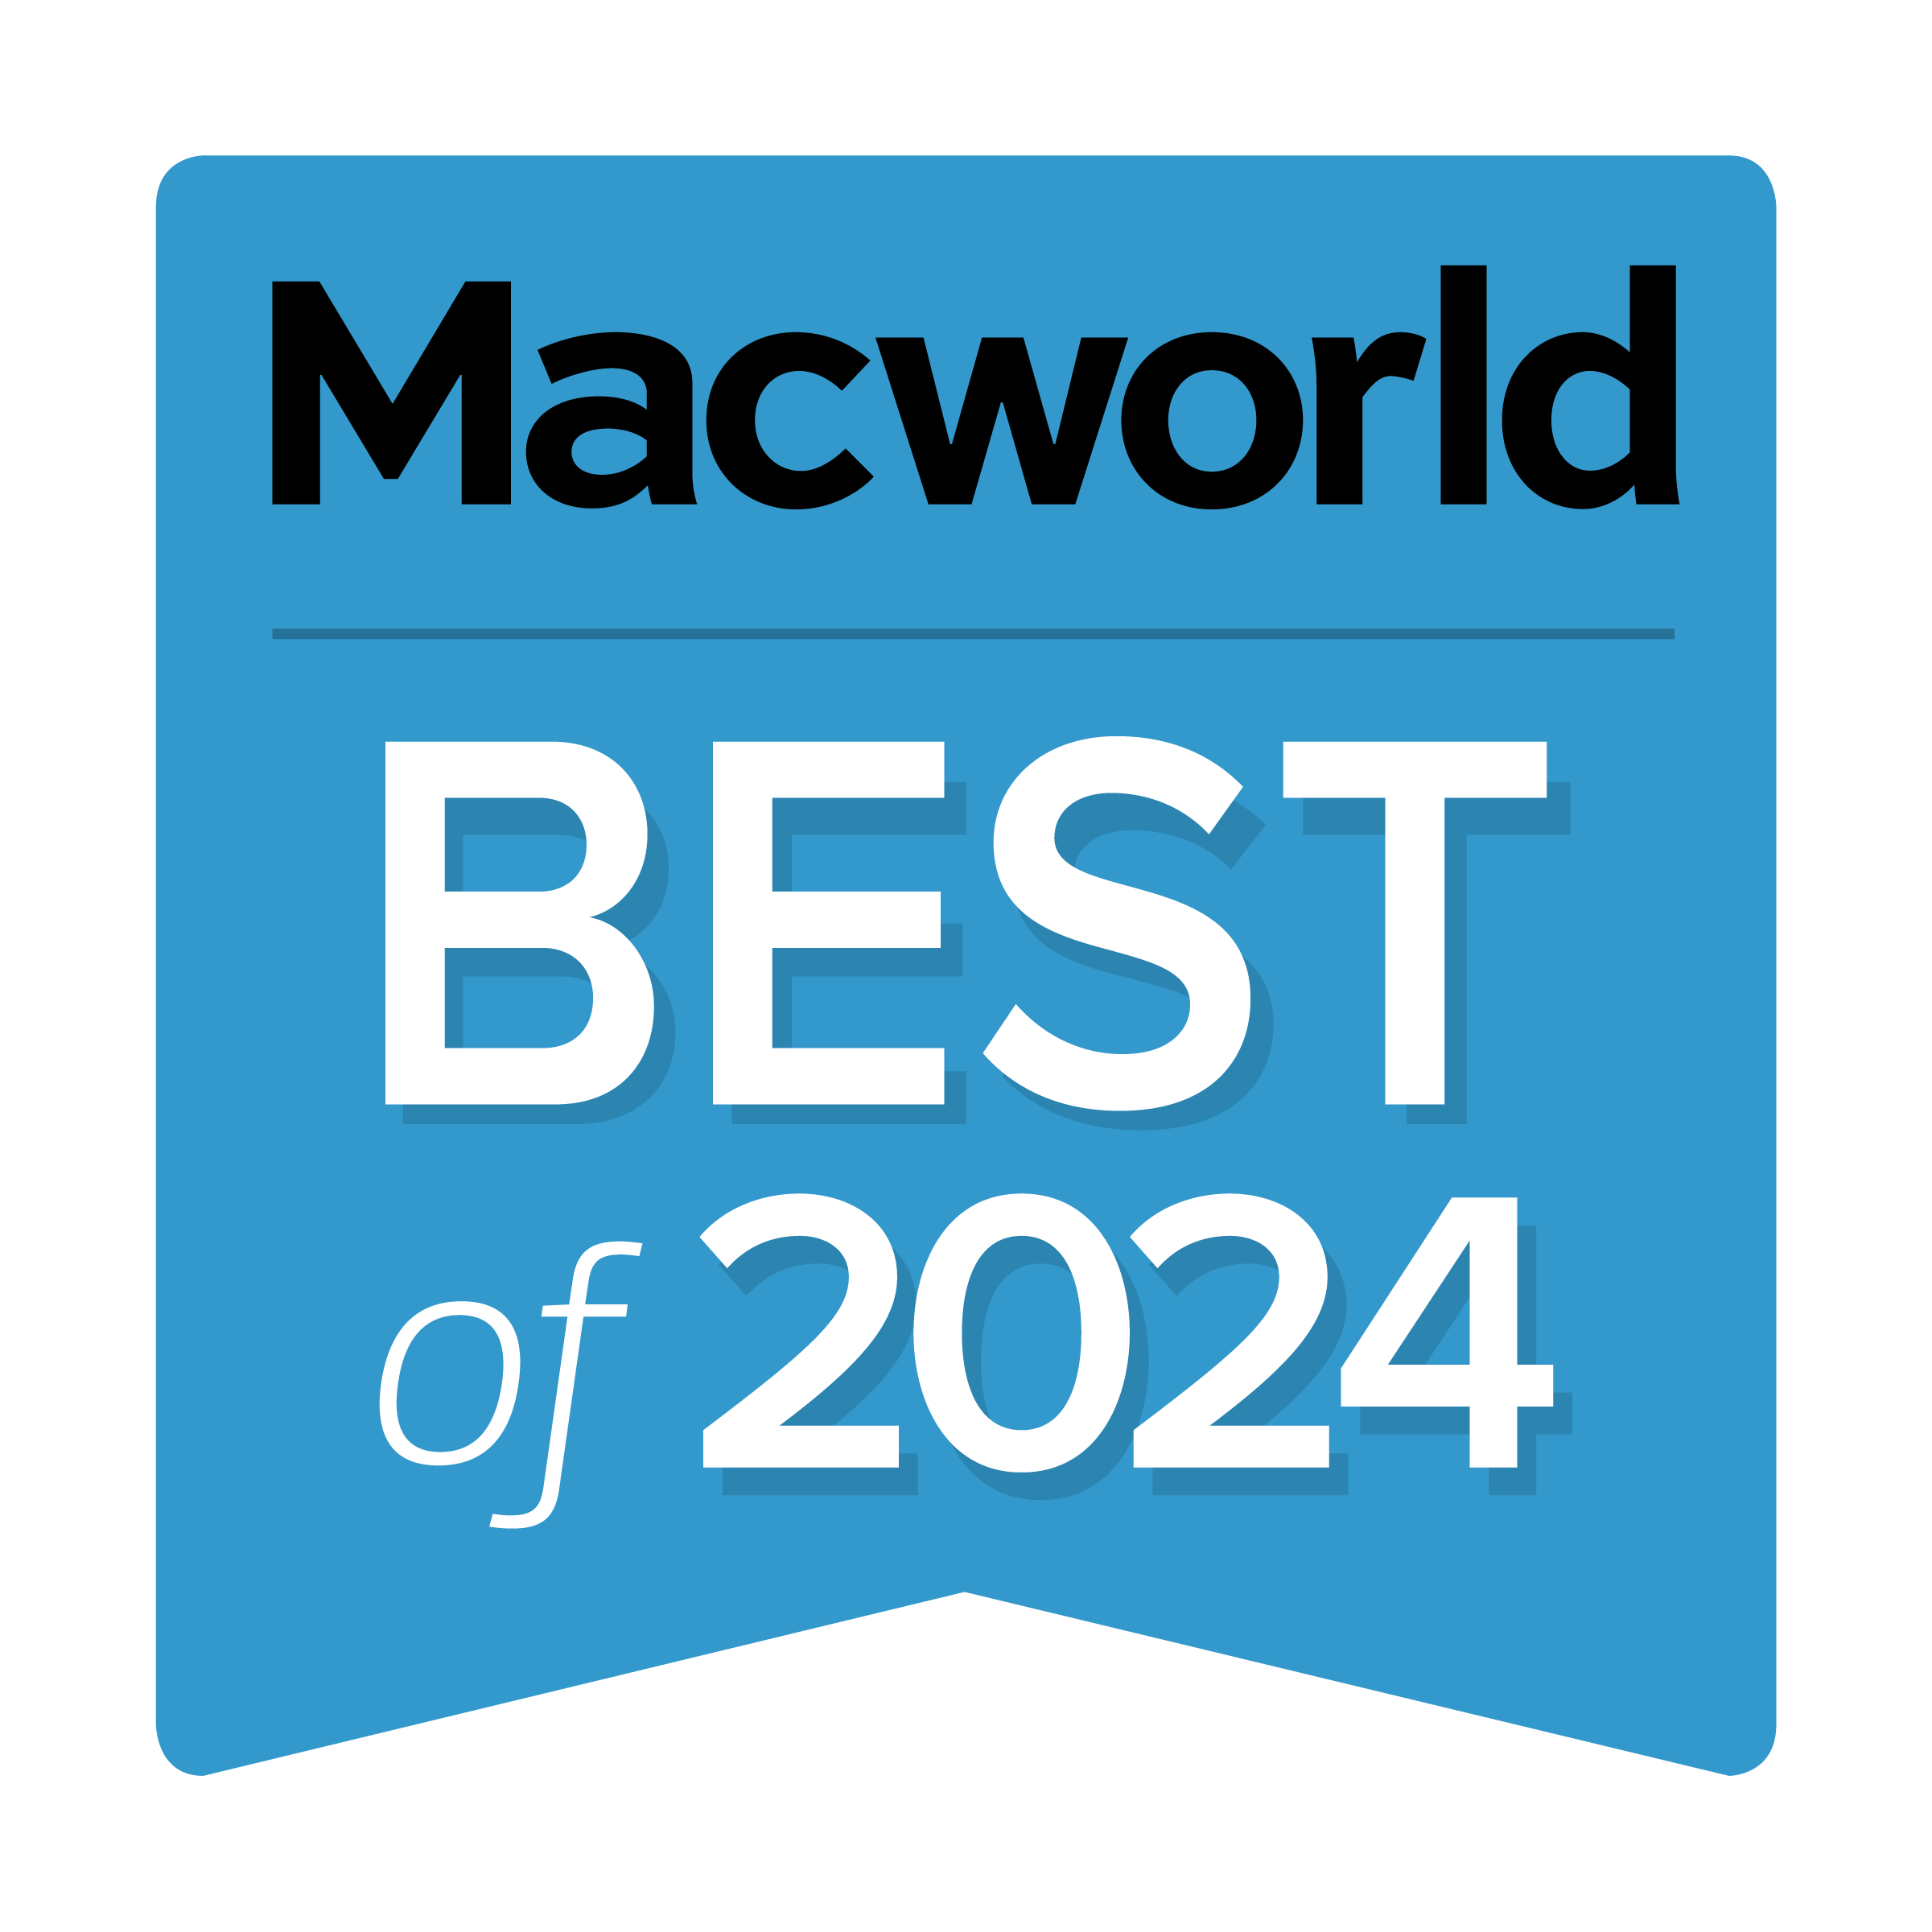 PD2725U is awarded the best of 2024 monitor for Mac-friendly features from MacWorld